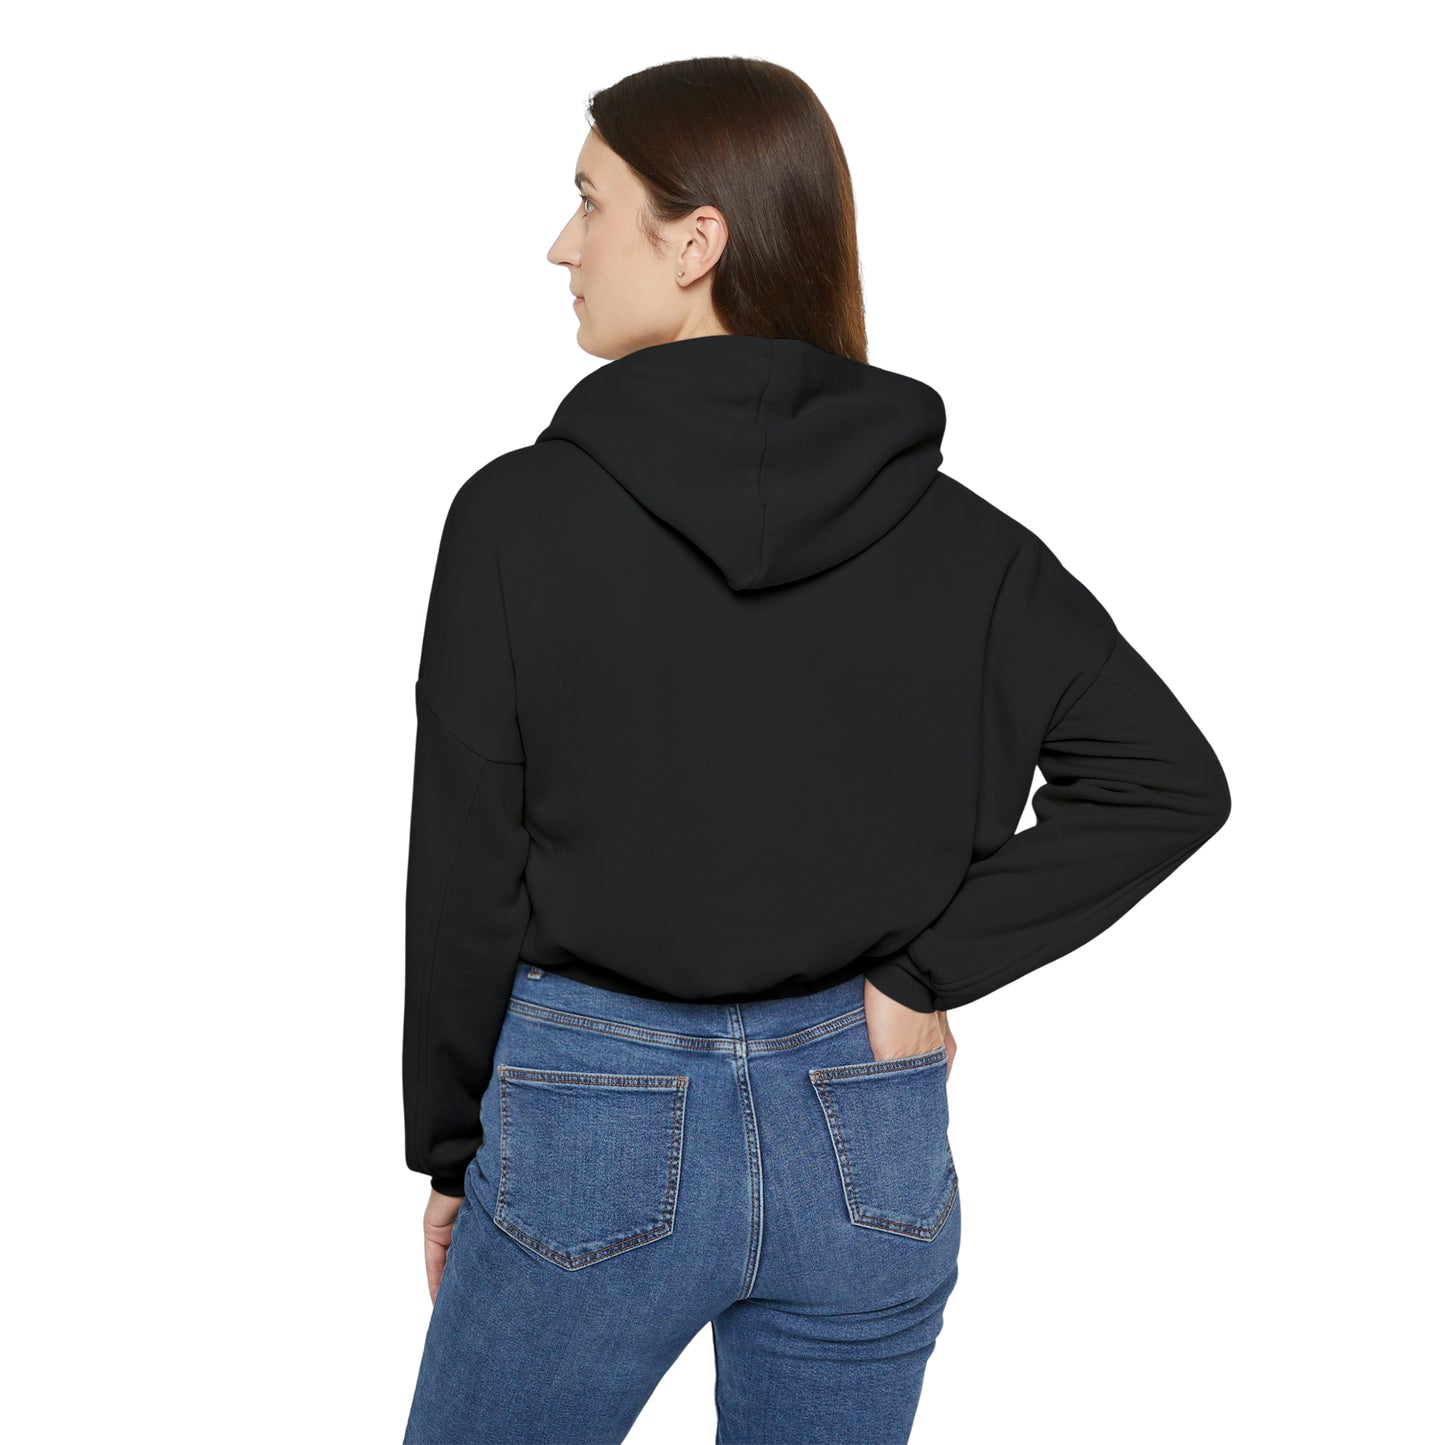 Taylor's Version Cinched Bottom Hoodie